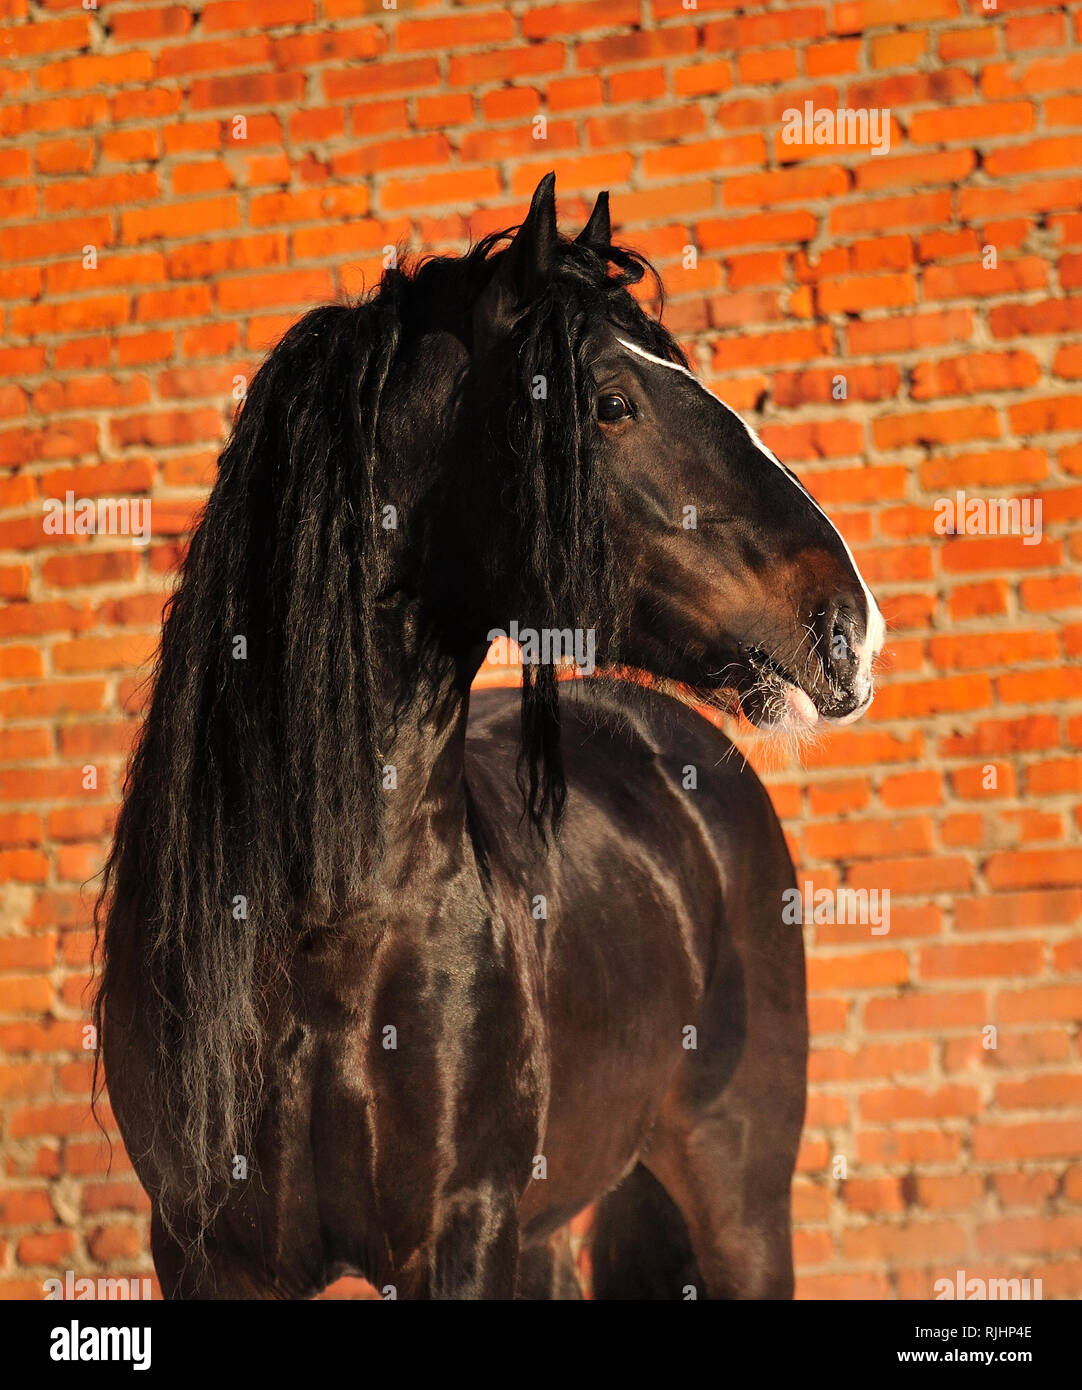 Black Vladimir heavy draft stallion looks to the right while standing at the red brick wall in winter. Horizontal, portrait, side view. Stock Photo